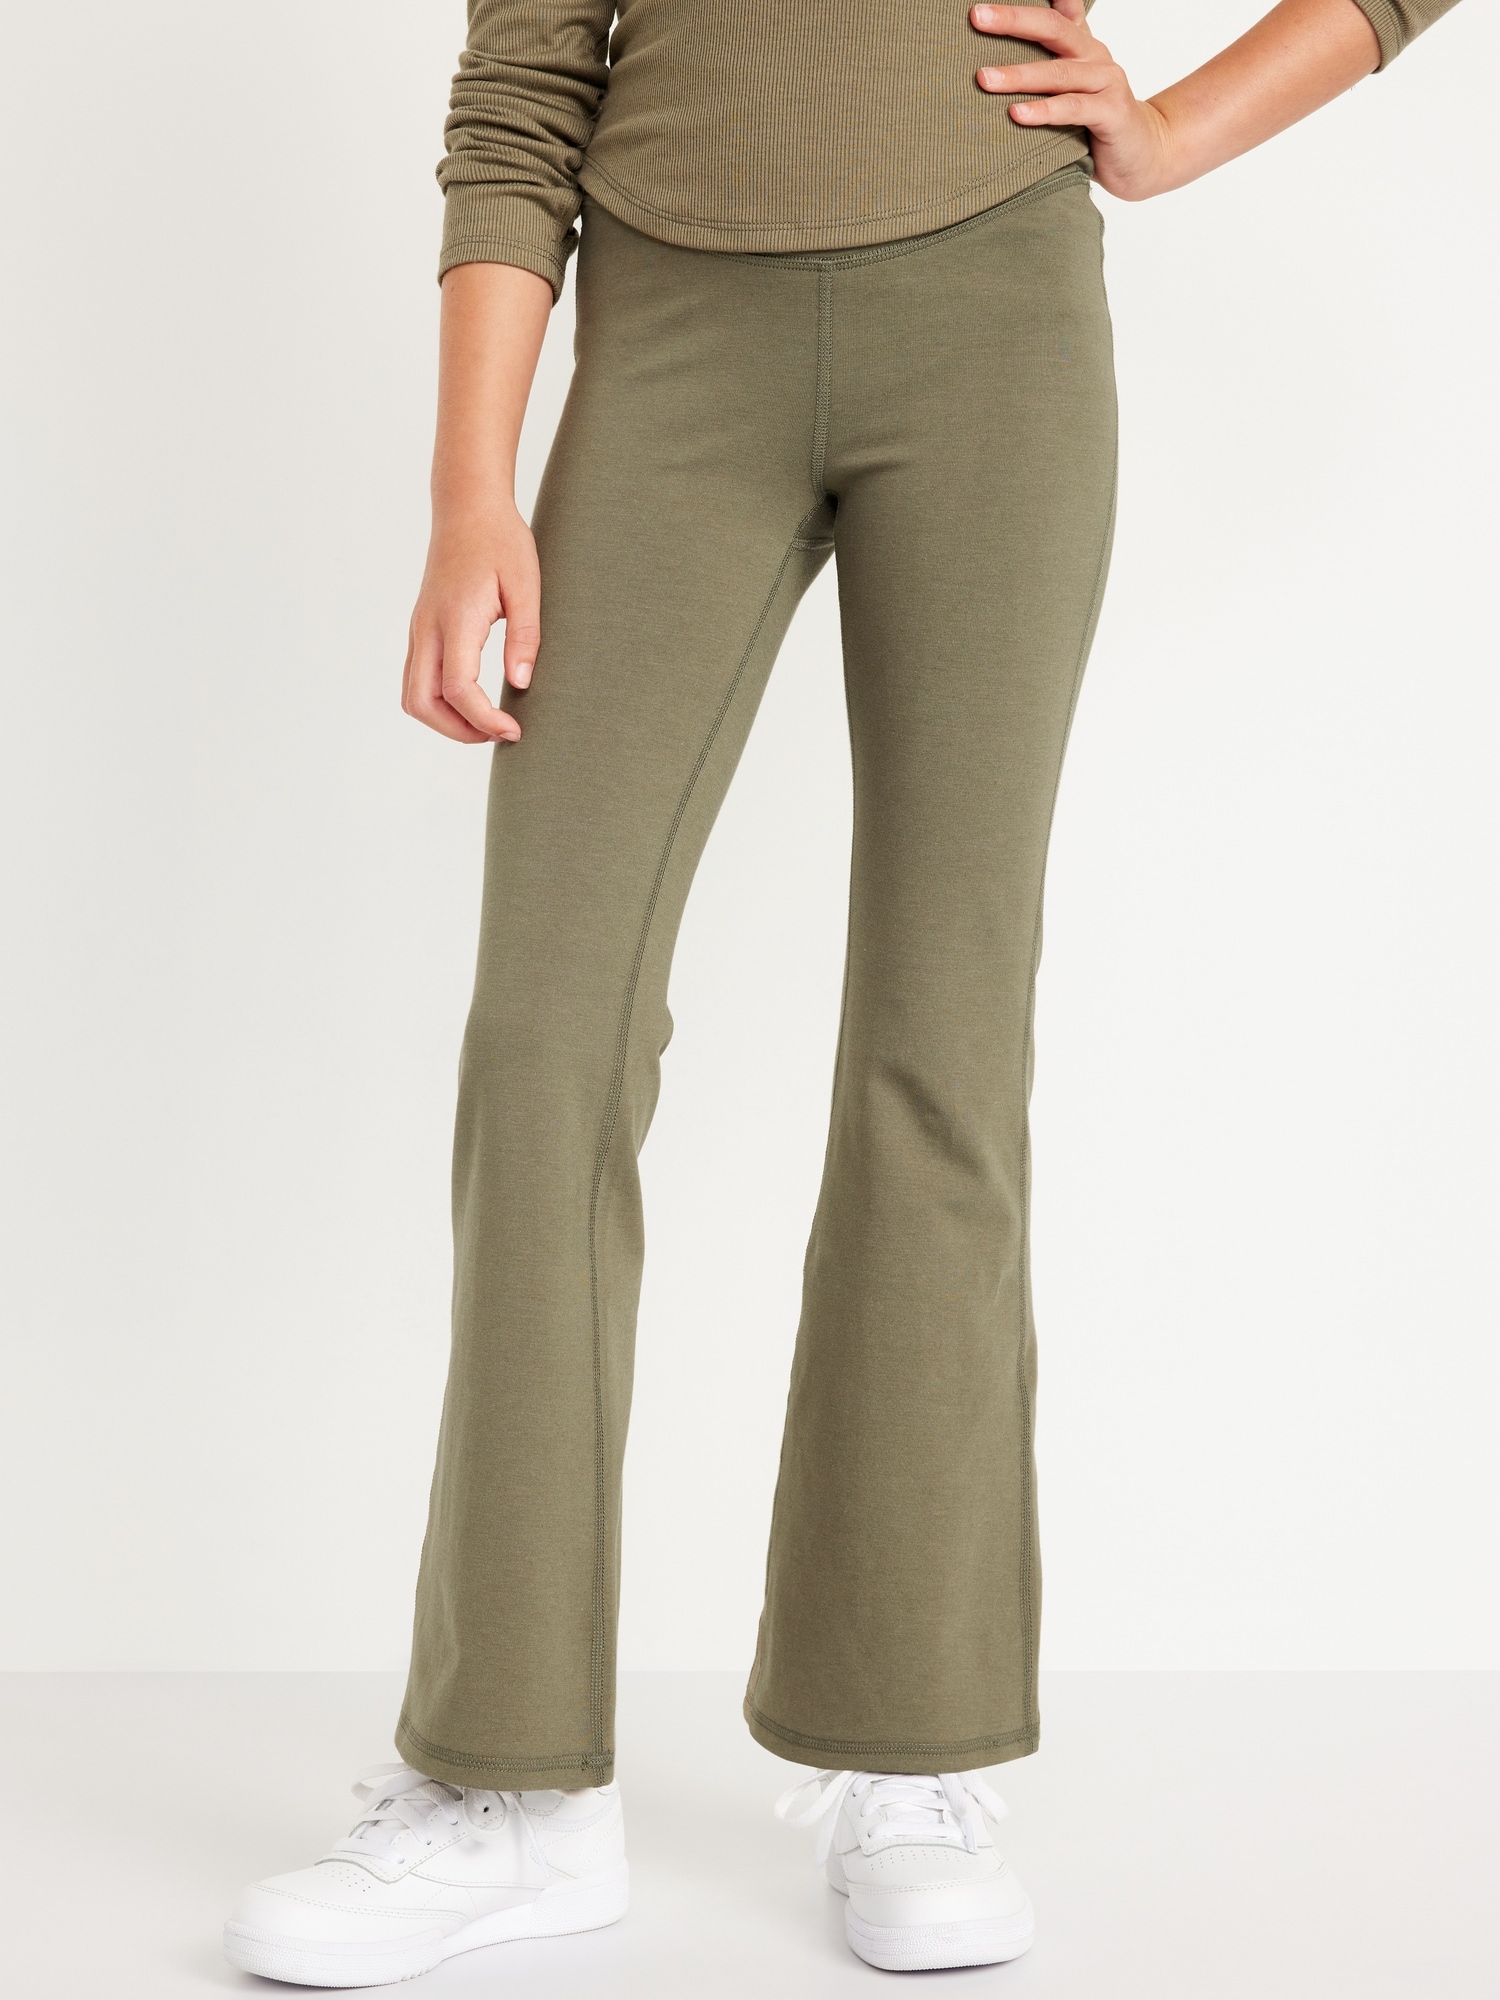 Old Navy Active Powerchill Leggings and Flares $10 (Reg. to $34.99